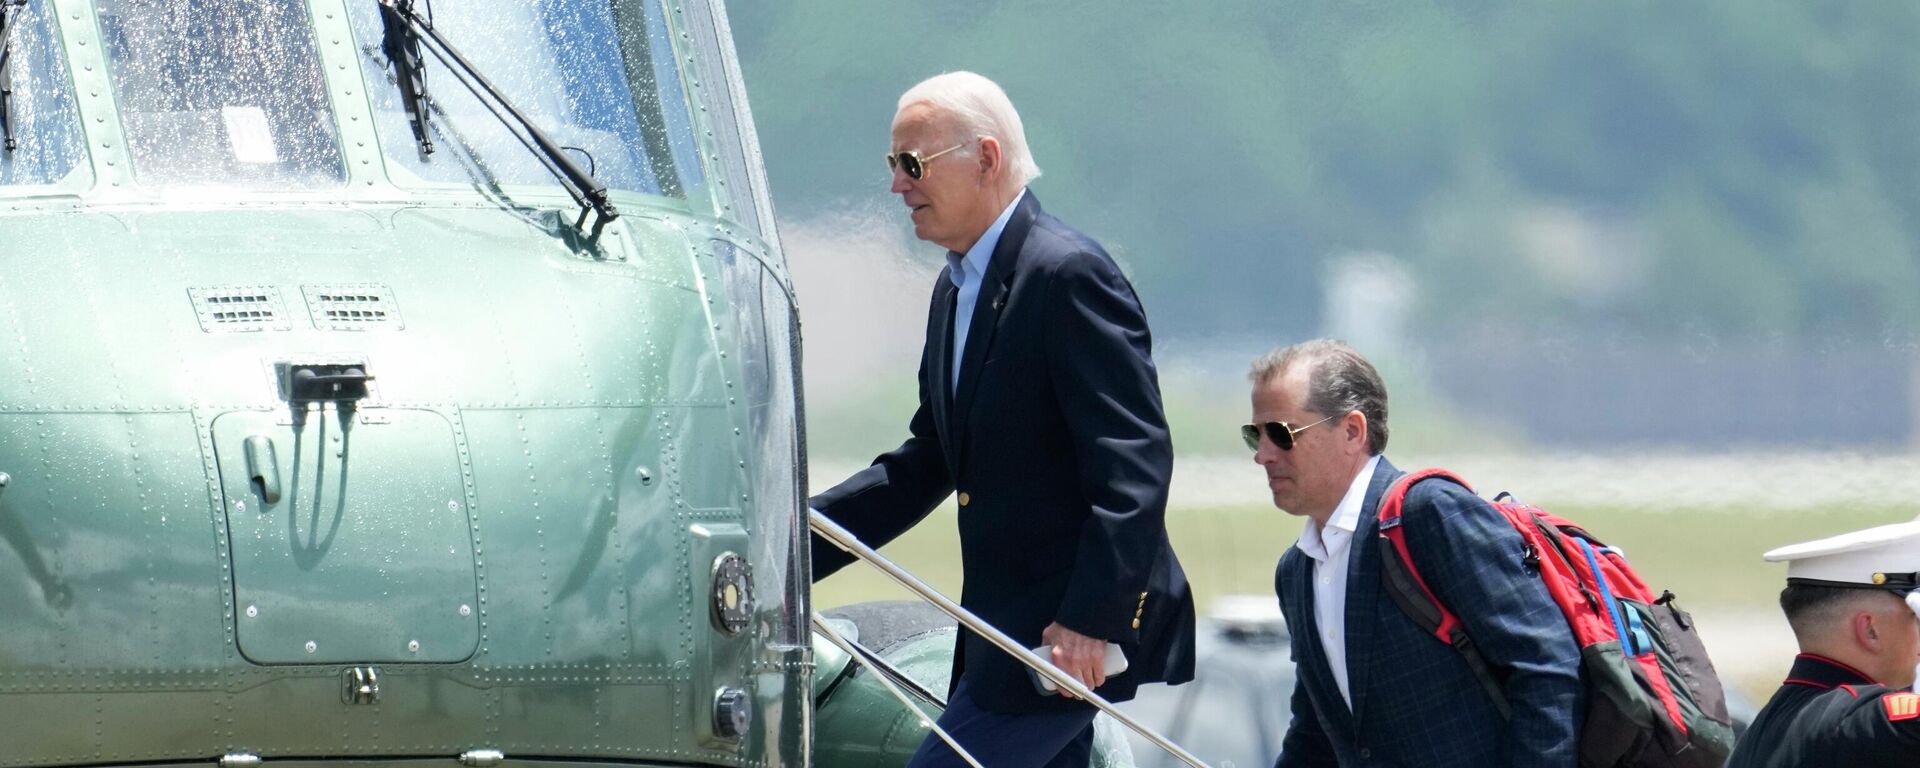 President Joe Biden boards Marine One with his son Hunter Biden as he leaves Andrews Air Force Base, Md., on his way to Camp David, Saturday, June 24, 2023 - Sputnik Africa, 1920, 16.09.2023